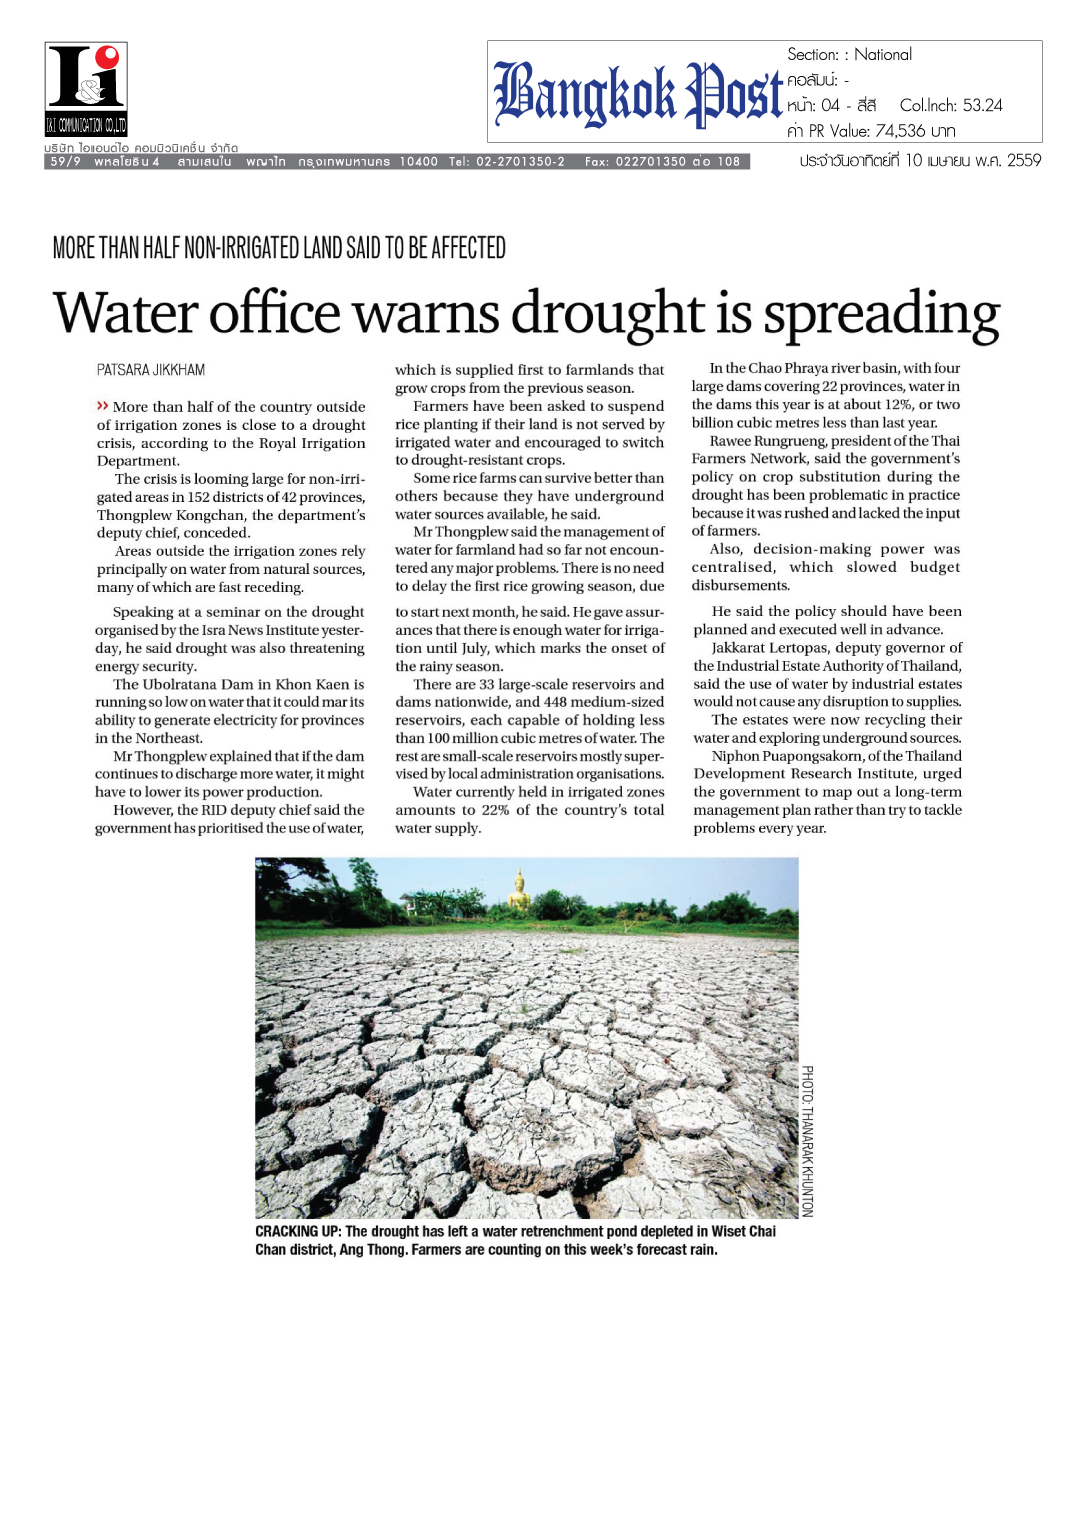 Bangkok Post 23-12-59  MORE THAN HALF NON-IRRIGATED LAND SAID TO BE AFFECTED Water office warns drought is spreading